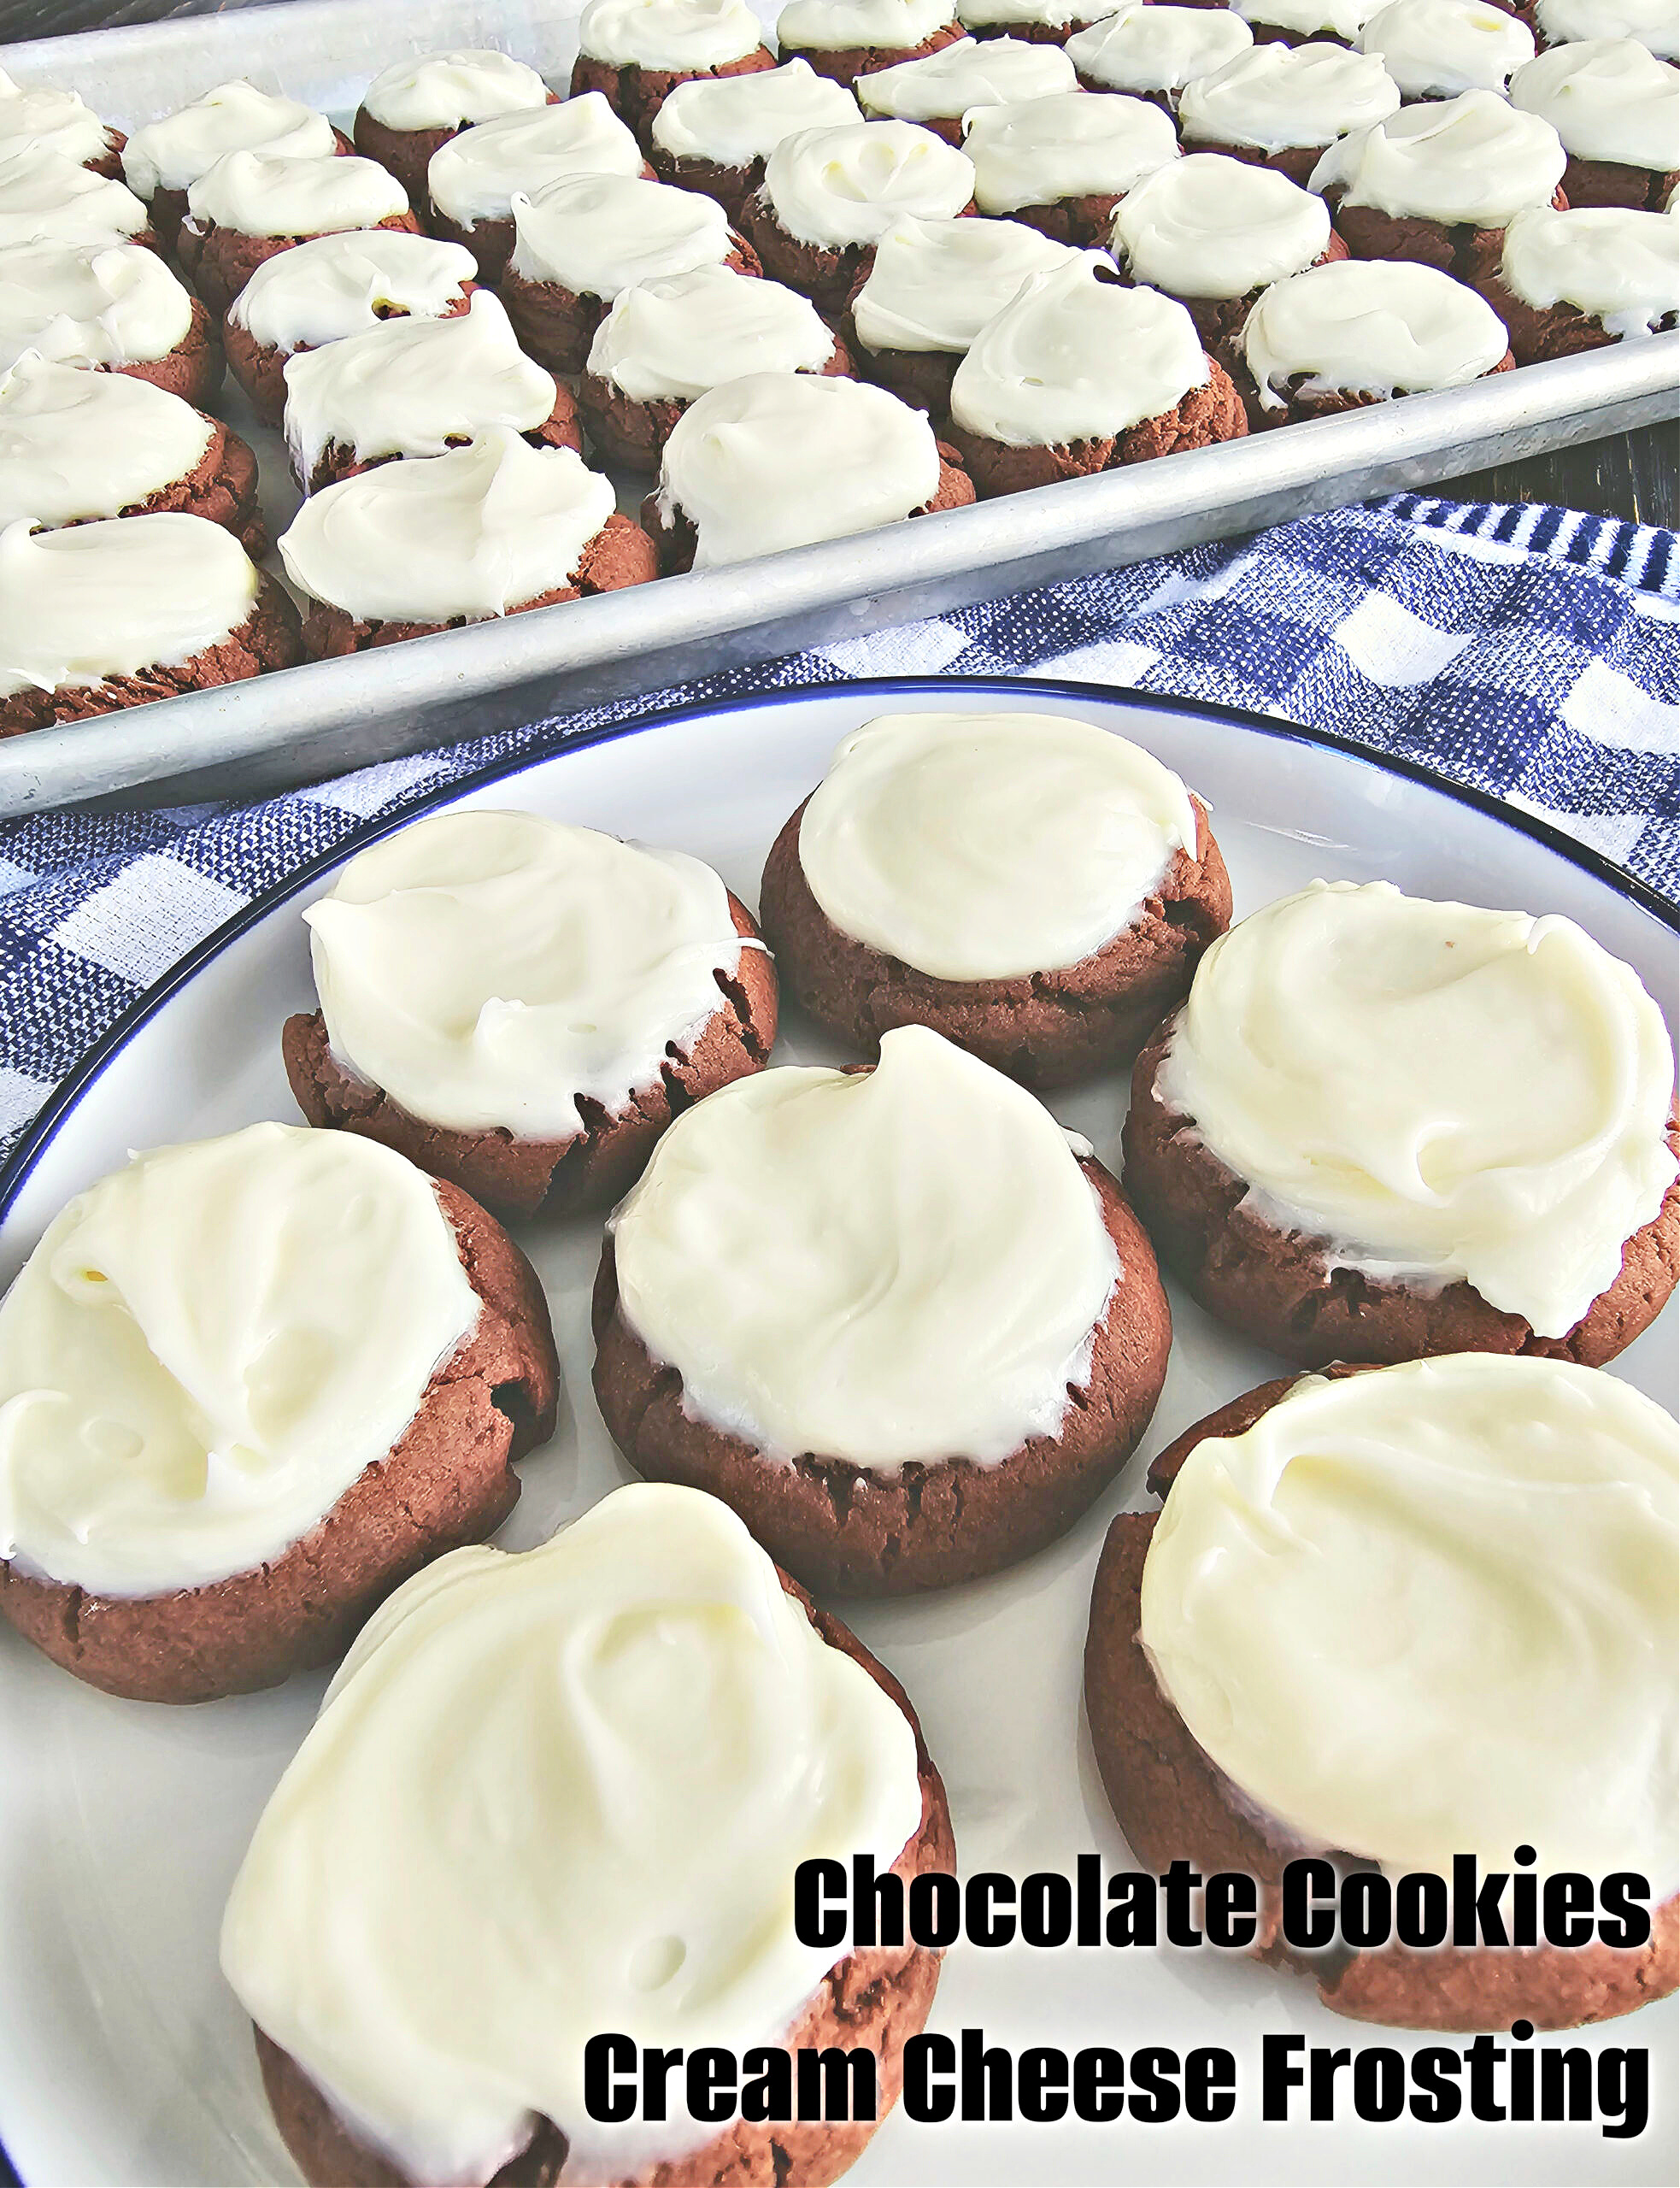 Chocolate Cookies with Cream Cheese Frosting #chocolate #cookies #dessert #creamcheesefrosting